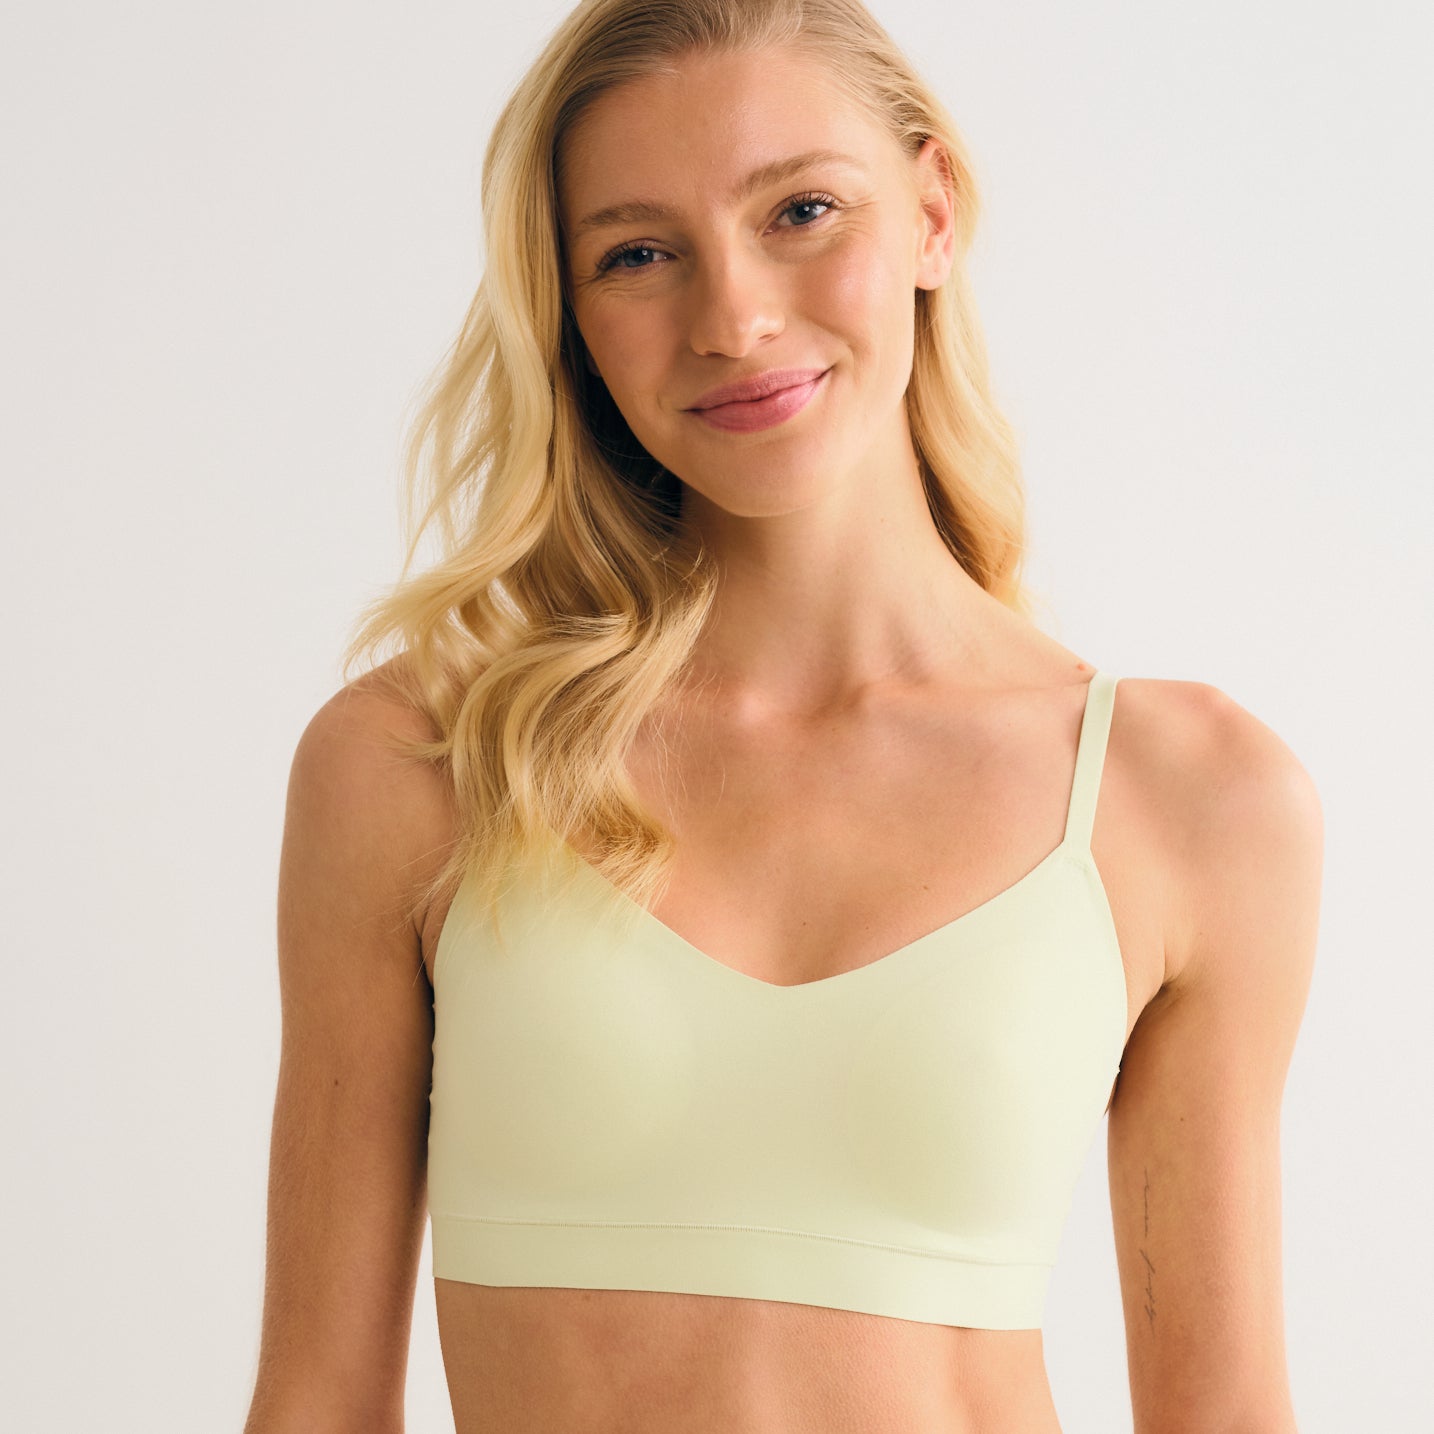 Floatley on Instagram: Our Cozy Bra, inside and out. Shop this wardrobe  staple now, on Floatley.com . . . #madeforcomfort #comfortwear  #comfortableinmyskin #bodypositive #bodypositivefitness  #bodypositivewarrior